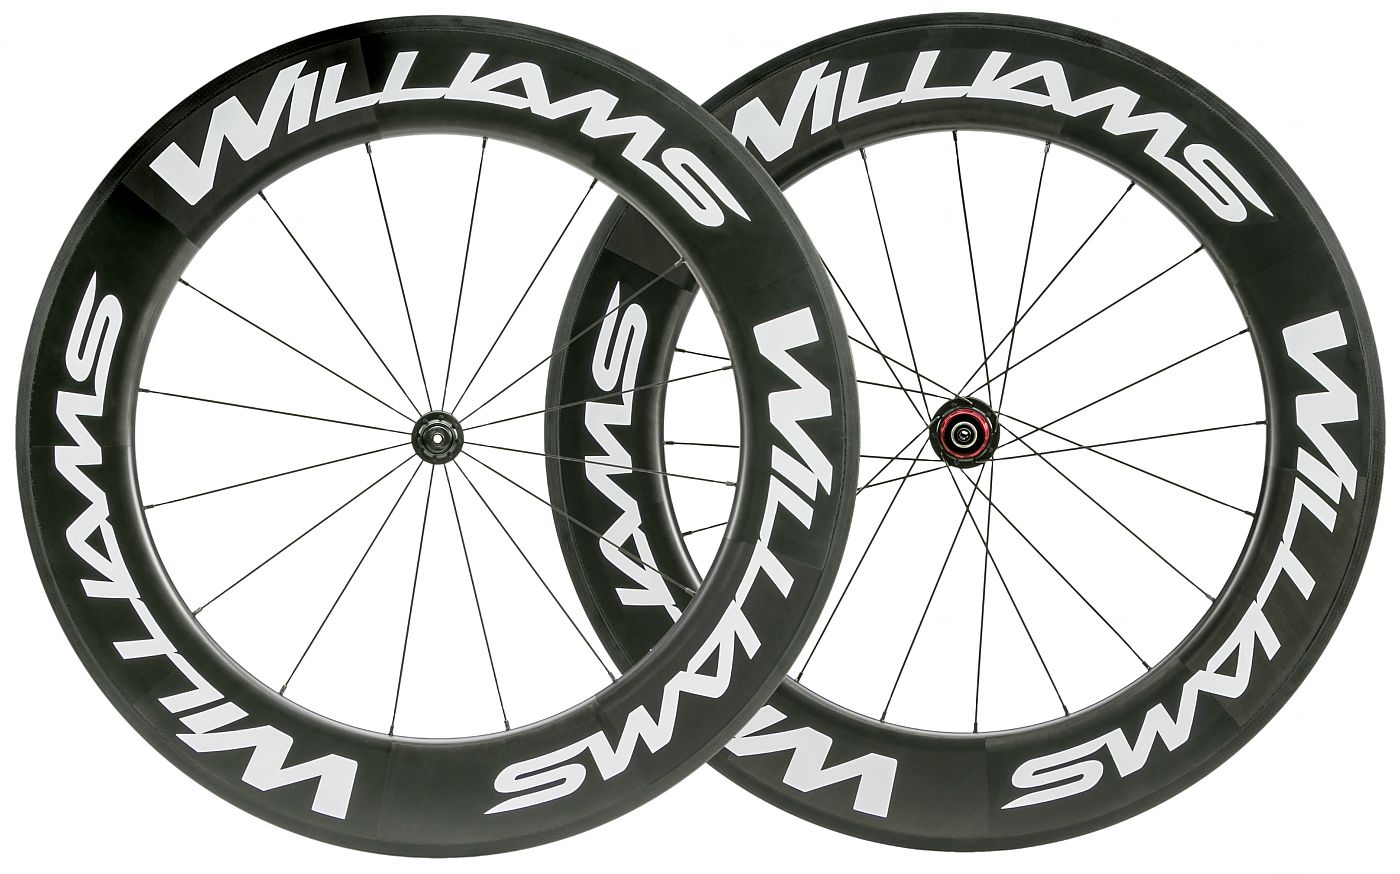 Williams releases new carbon clincher wheel line